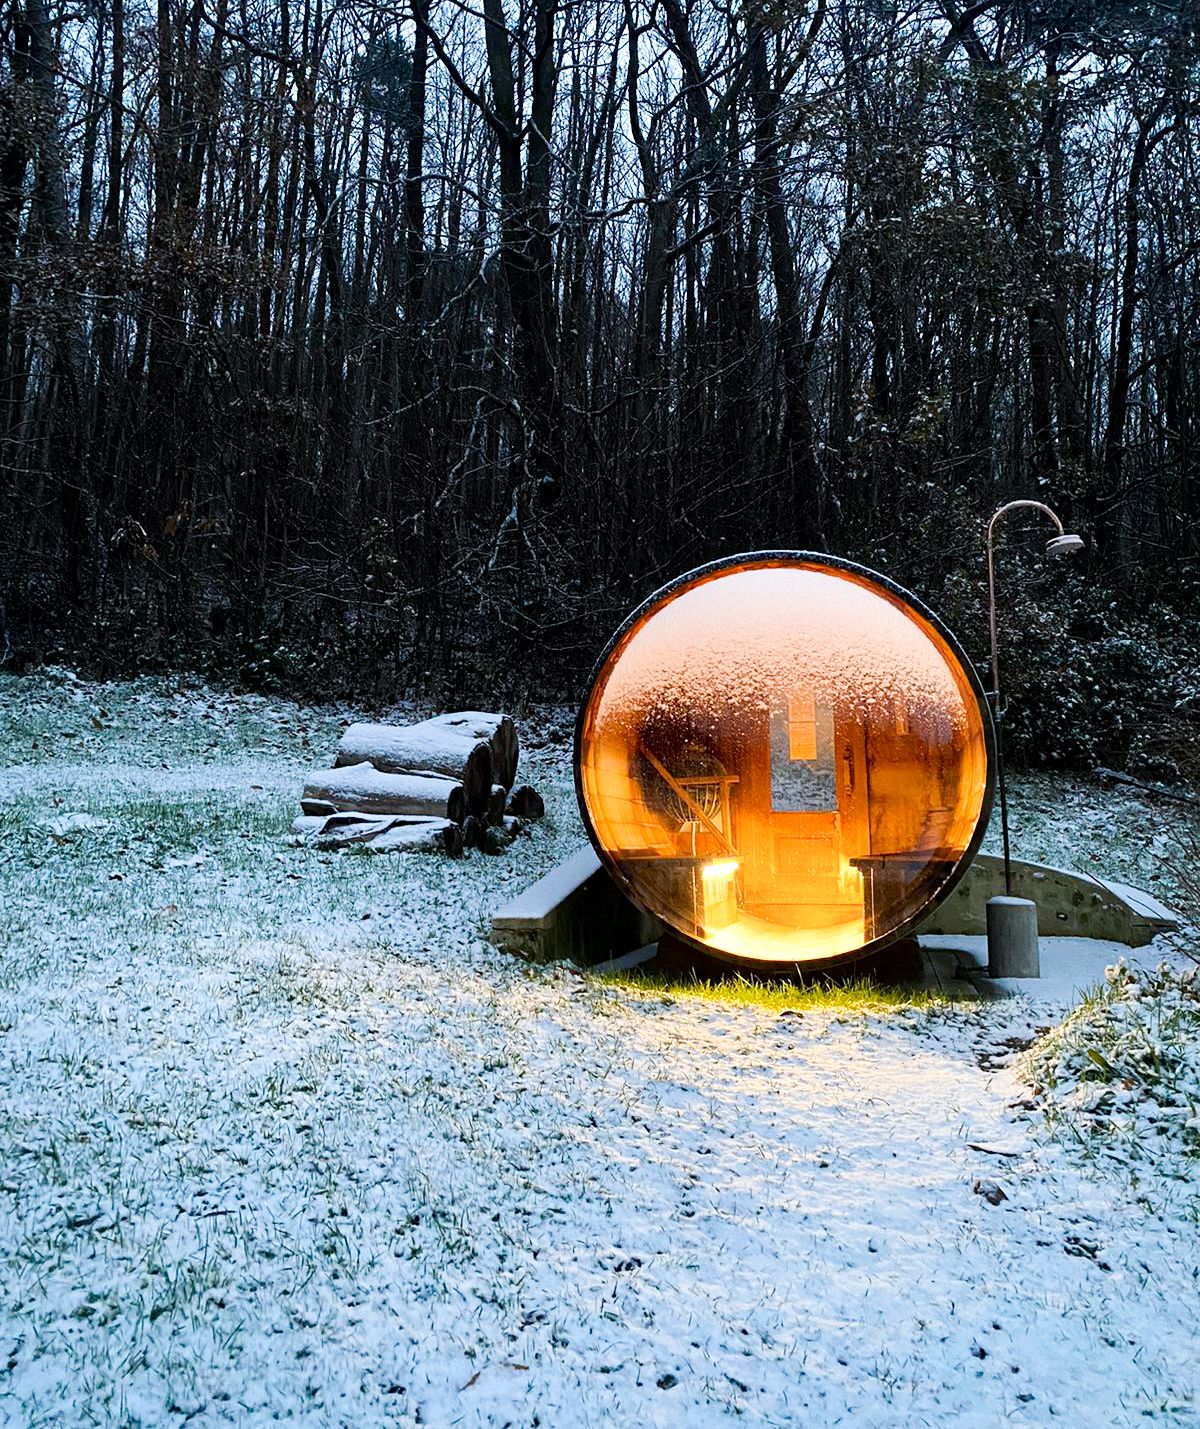 A single-room sauna with a large glass wall lit up in the middle of a snowy forest scene. 